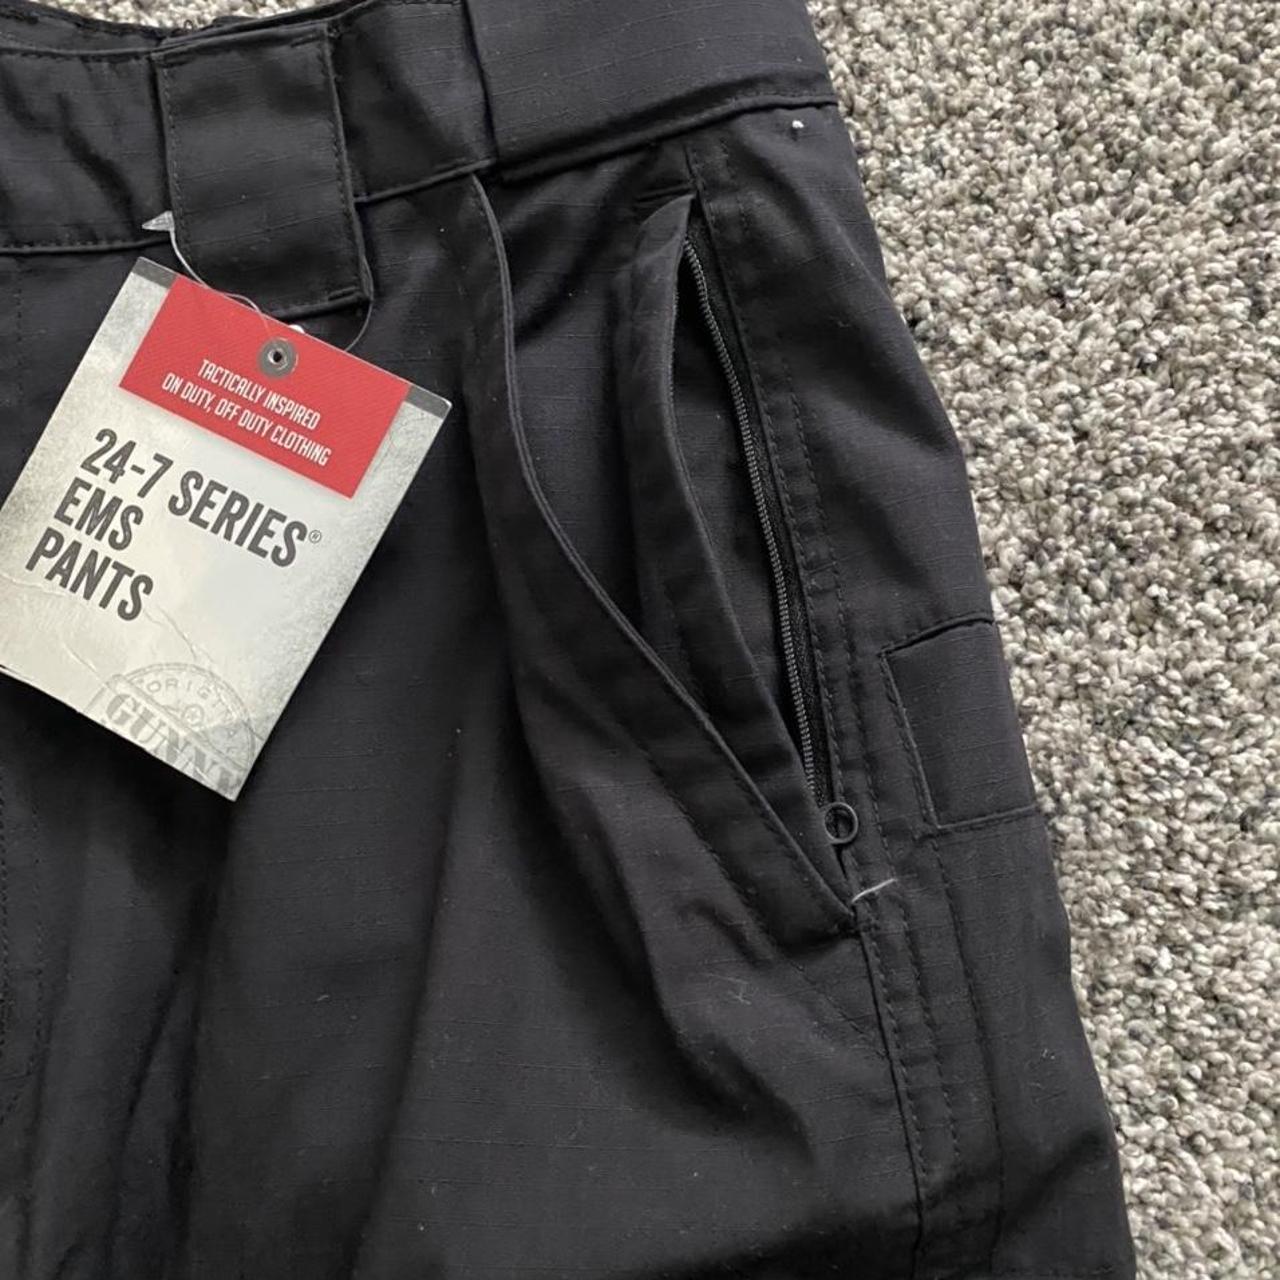 Tru spec ems/ cargo pants. Brand new with tags. Very... - Depop